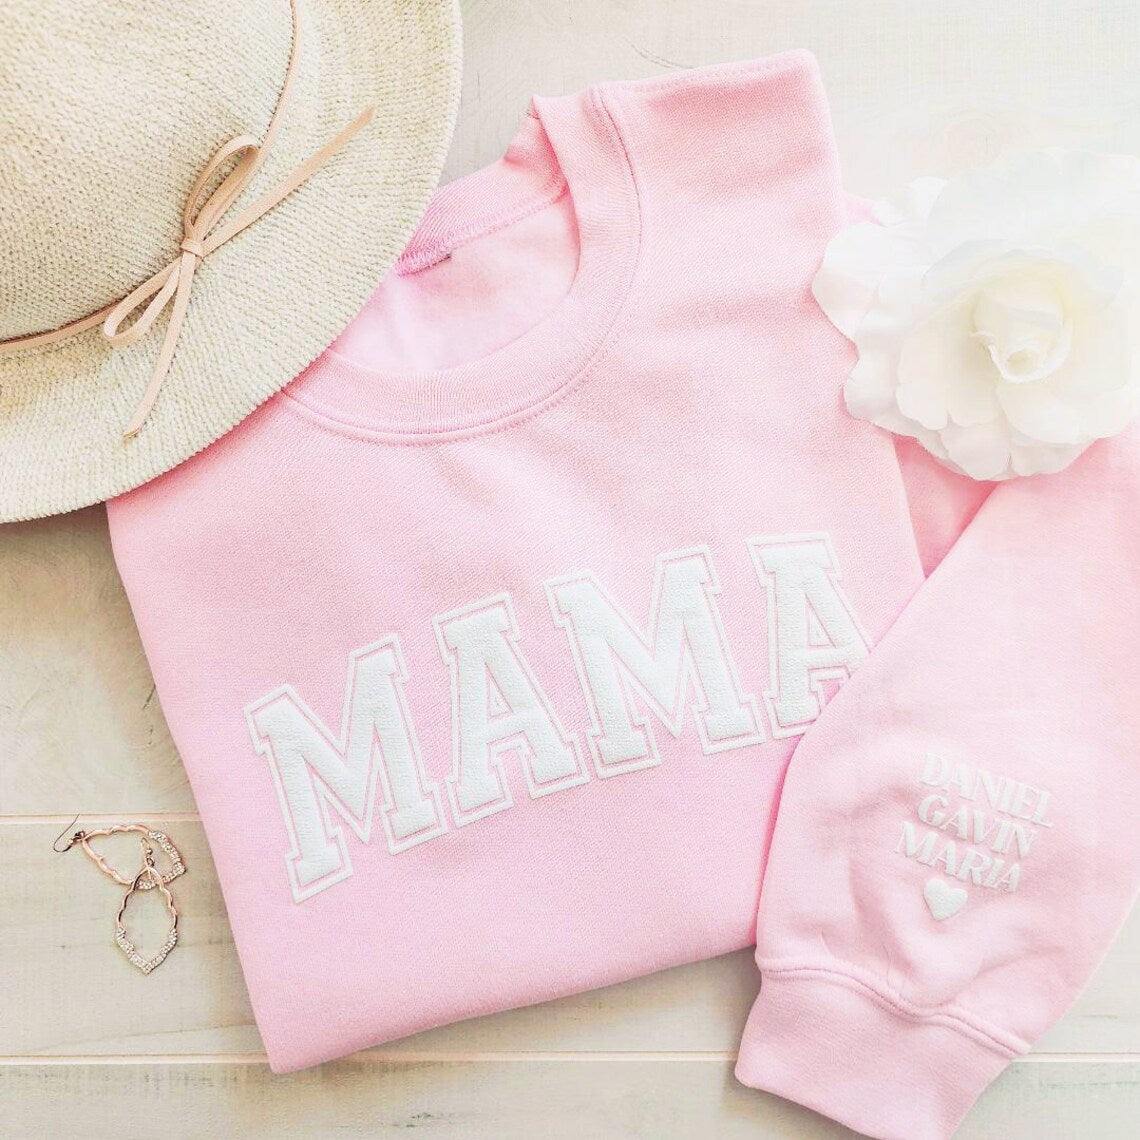 Personalized Mama Keepsake Sweatshirt with Puff Lettering and Kid Names on Sleeve Mother's Day Gift